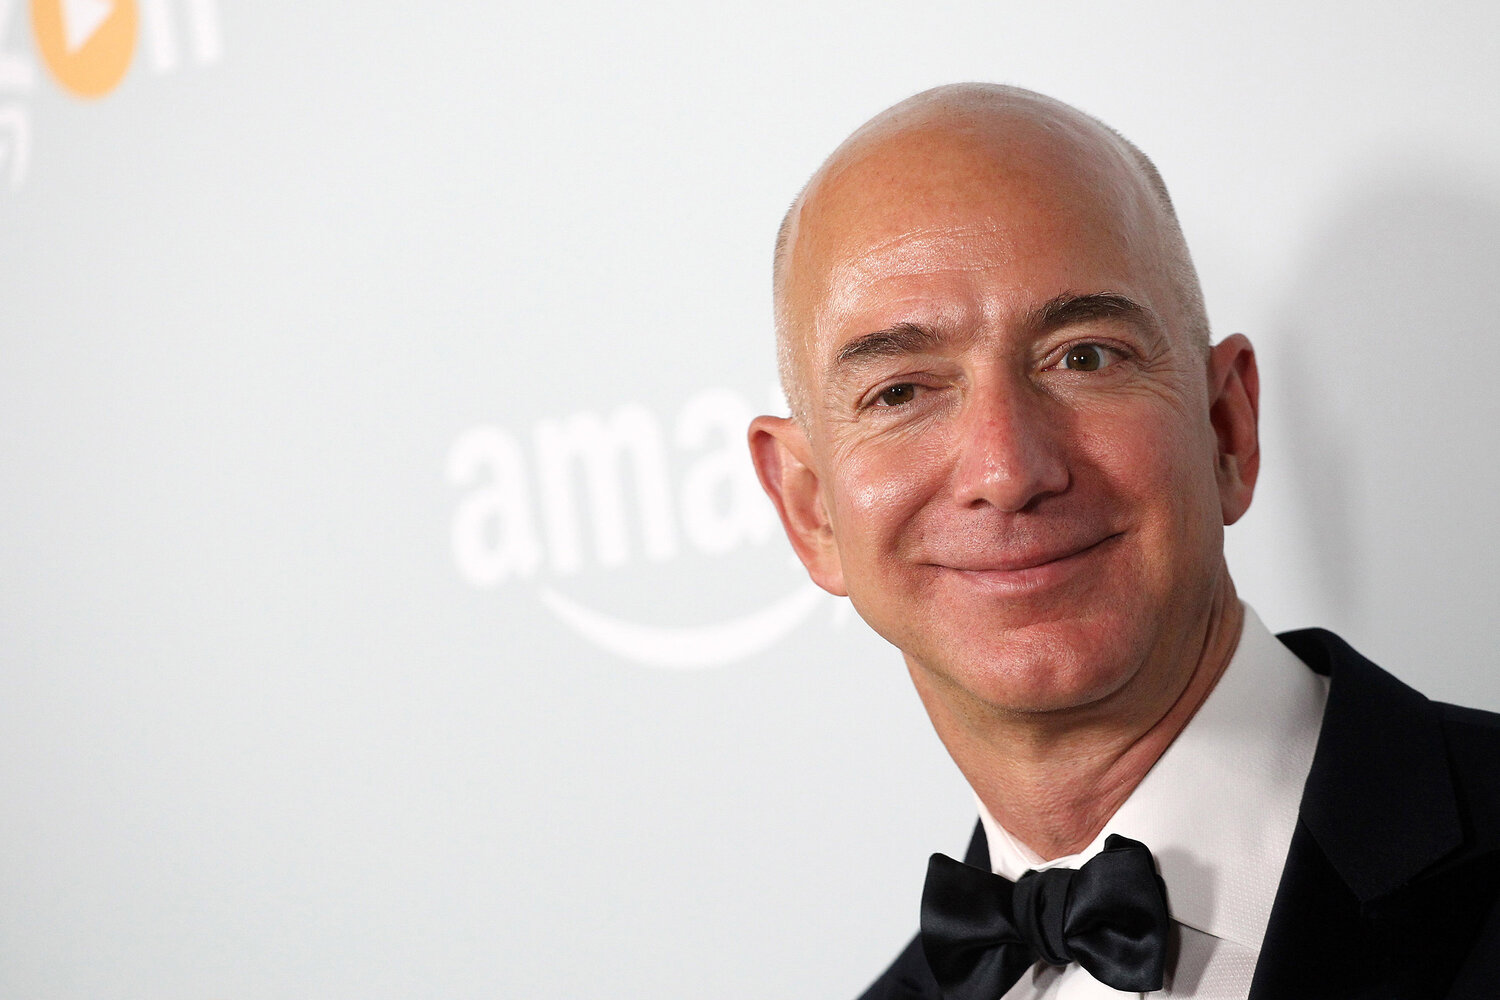 Jeff Bezos attends the Amazon Emmy Award afterparty at Sunset Tower in West Hollywood, California, on Sept. 18, 2016. (Tommaso Boddi/AFP/Getty Images/TNS)